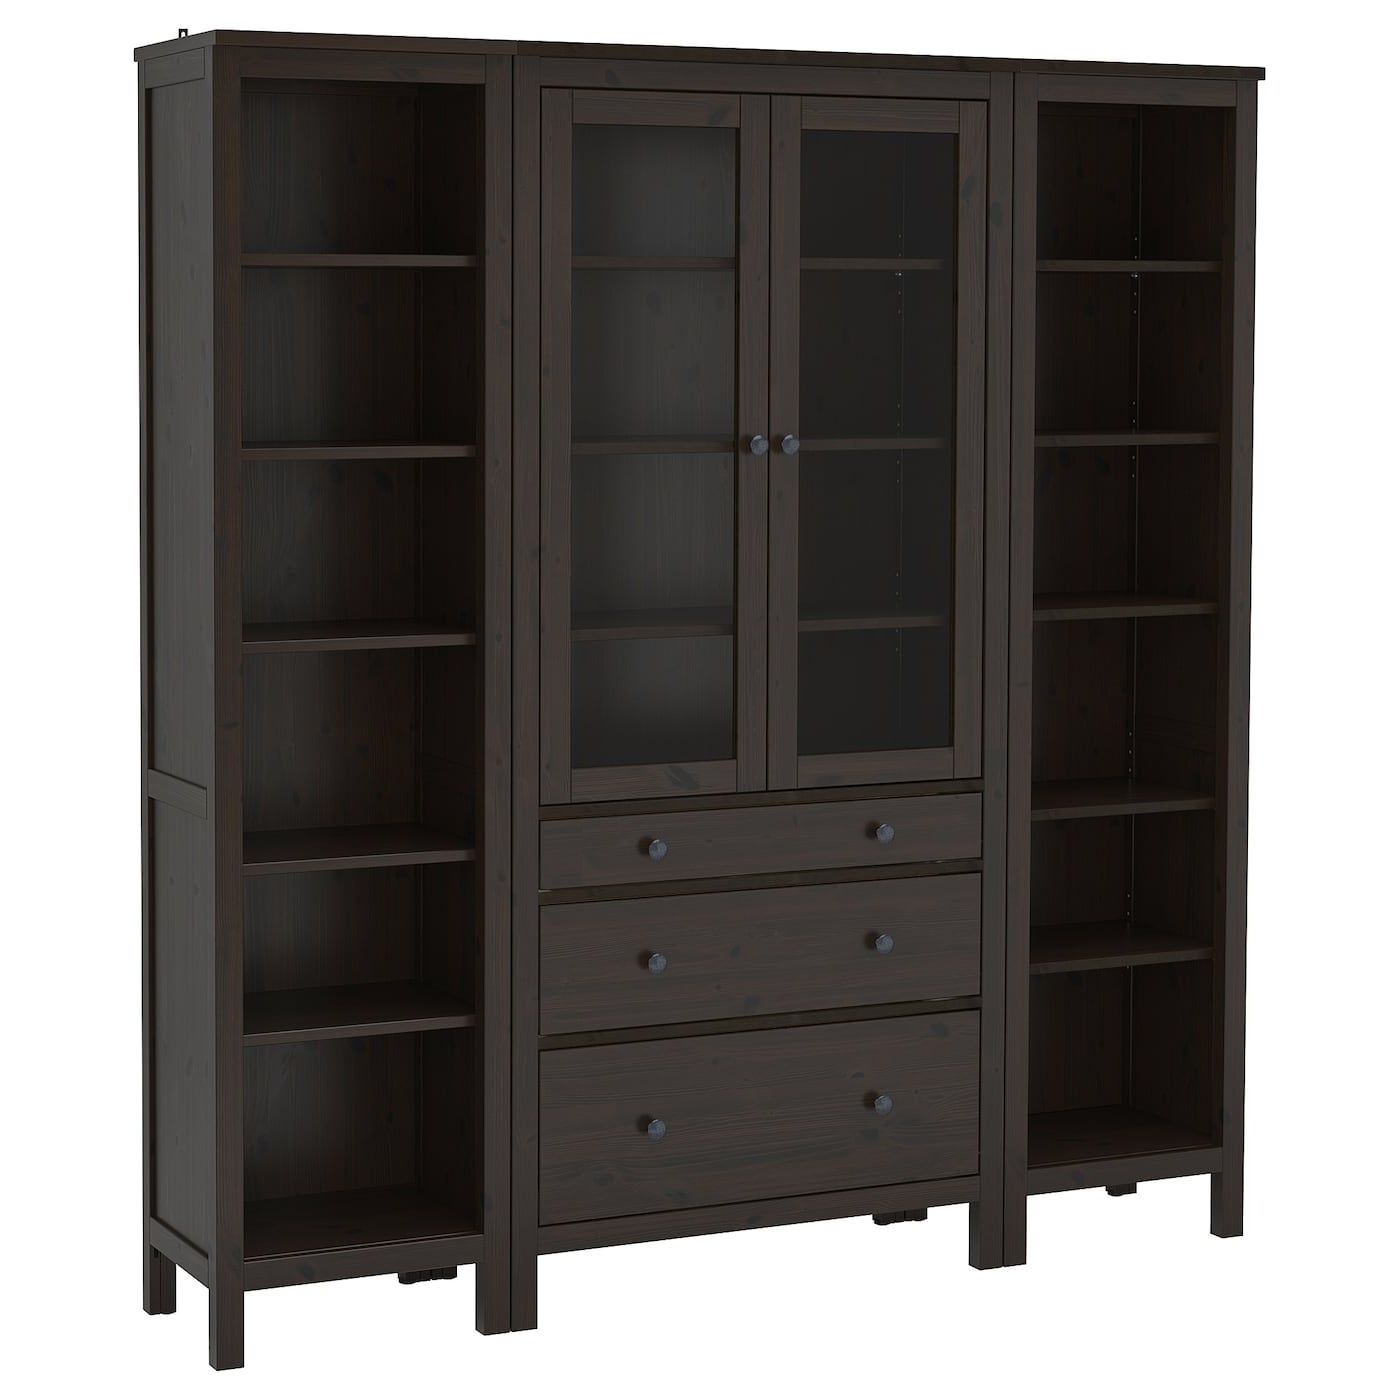 Hemnes Storage Combination W Doors/drawers, Black Brown Within Dark Brown Tv Cabinets With 2 Sliding Doors And Drawer (Gallery 17 of 20)